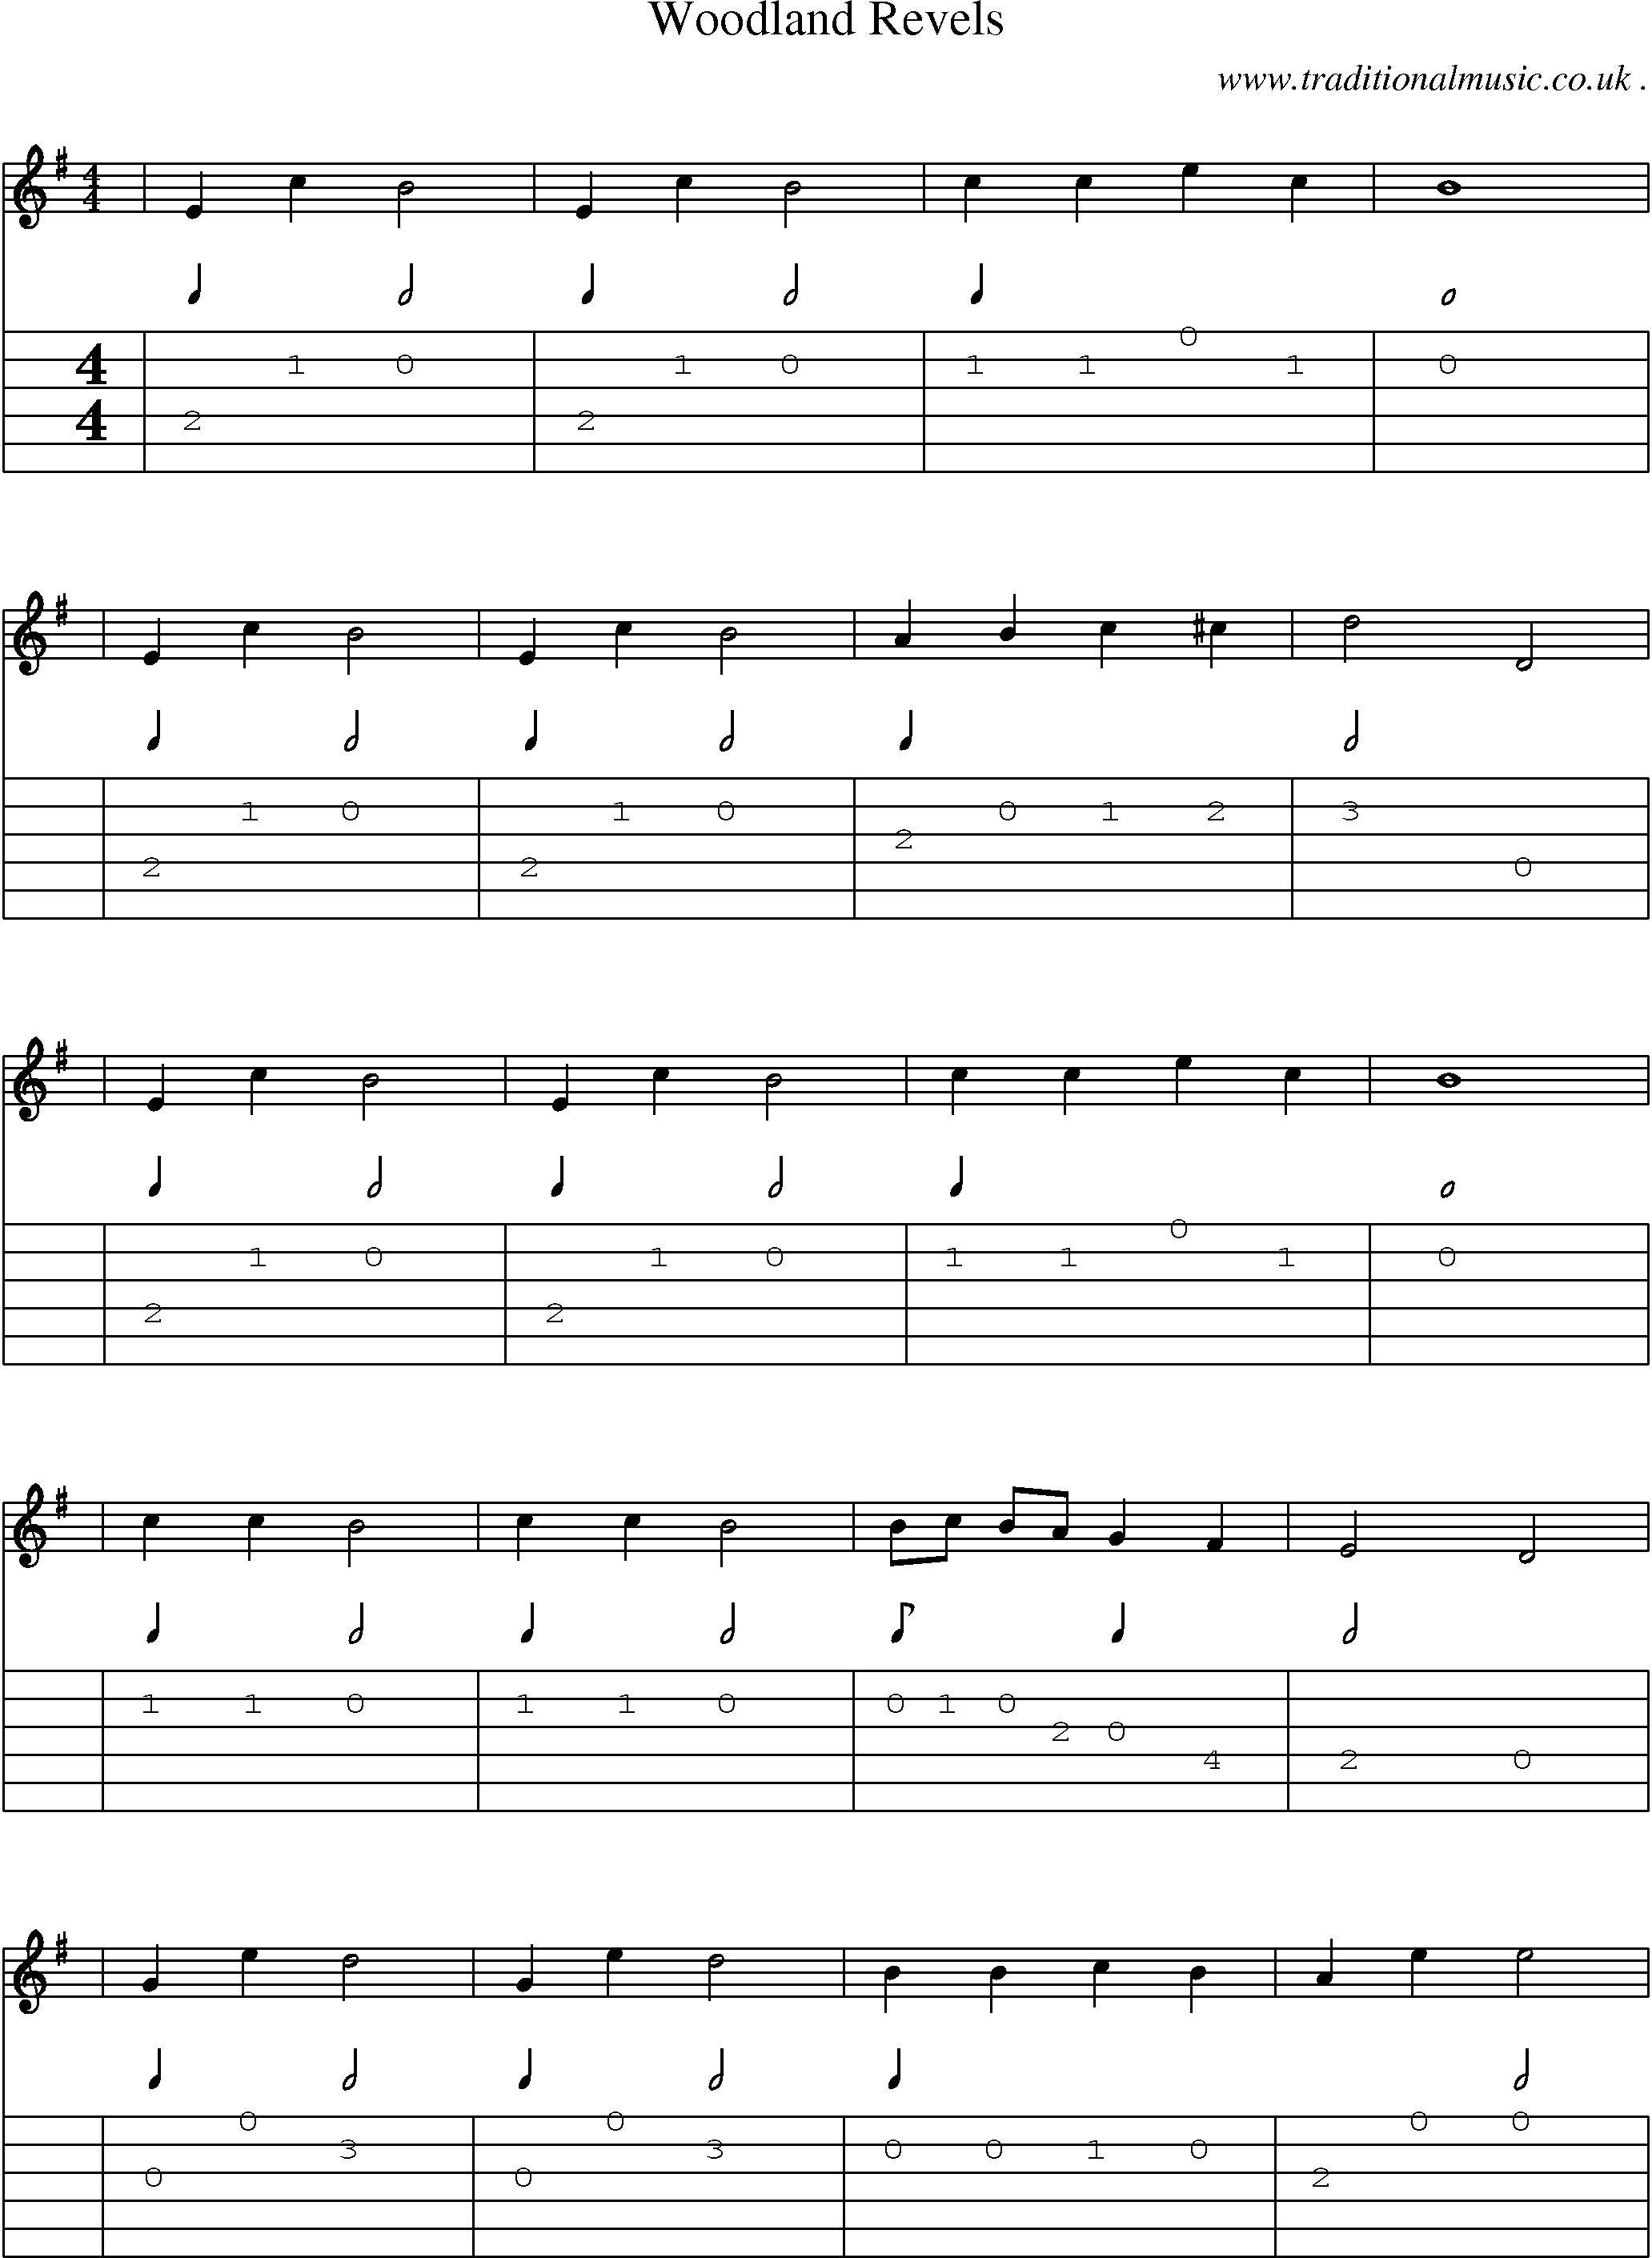 Sheet-Music and Guitar Tabs for Woodland Revels